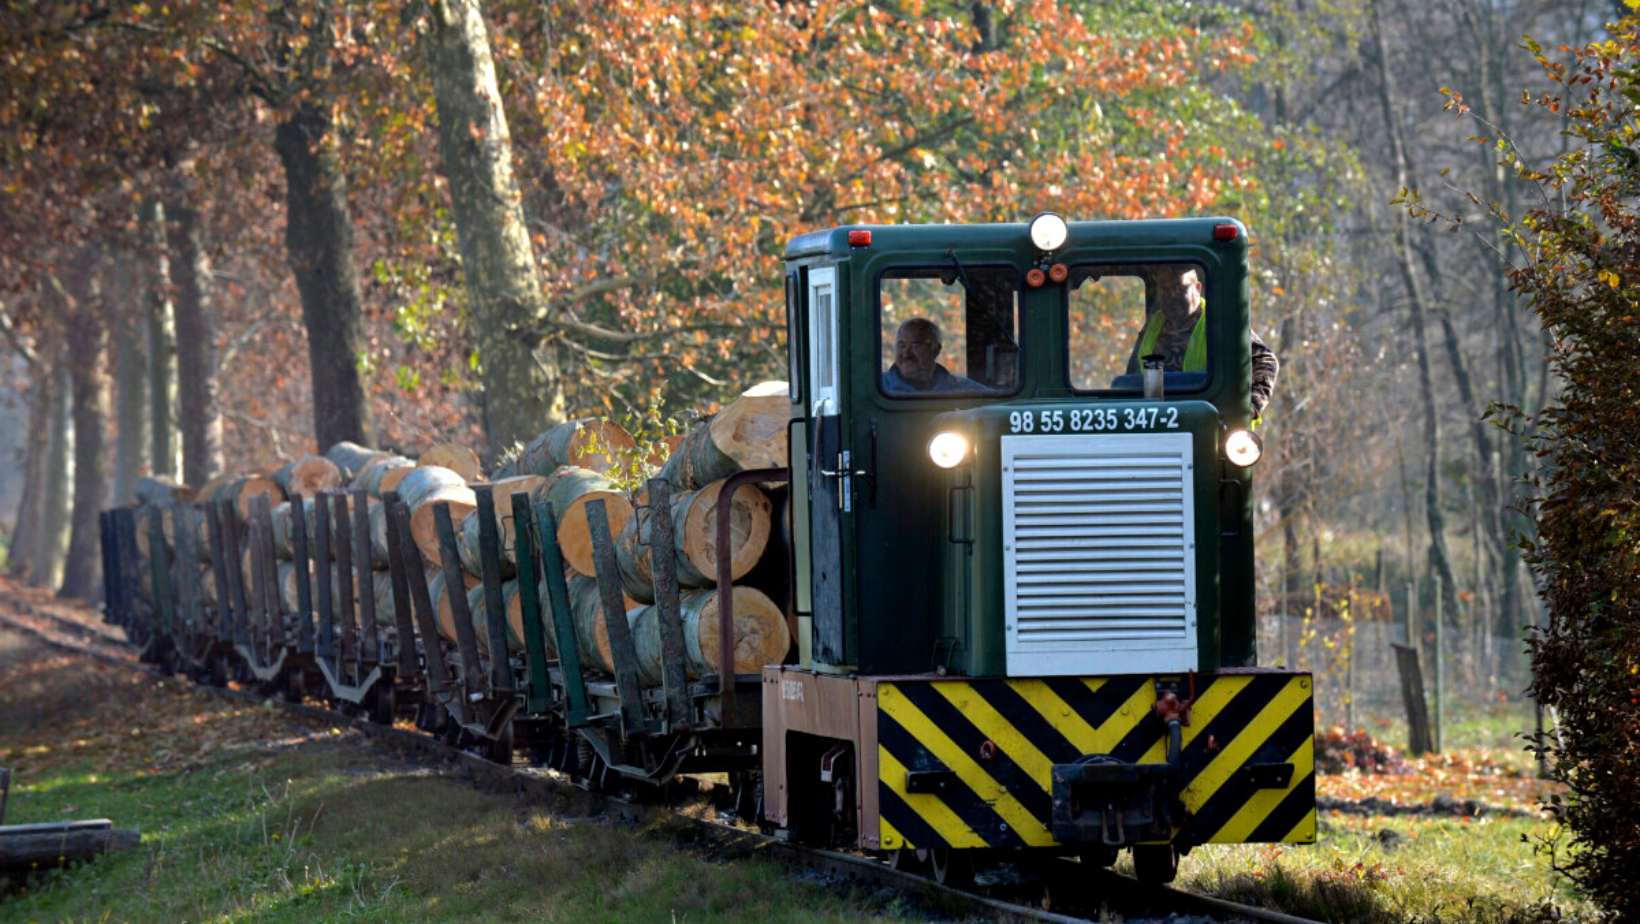 5 unmissable train rides to take this autumn in Hungary 2